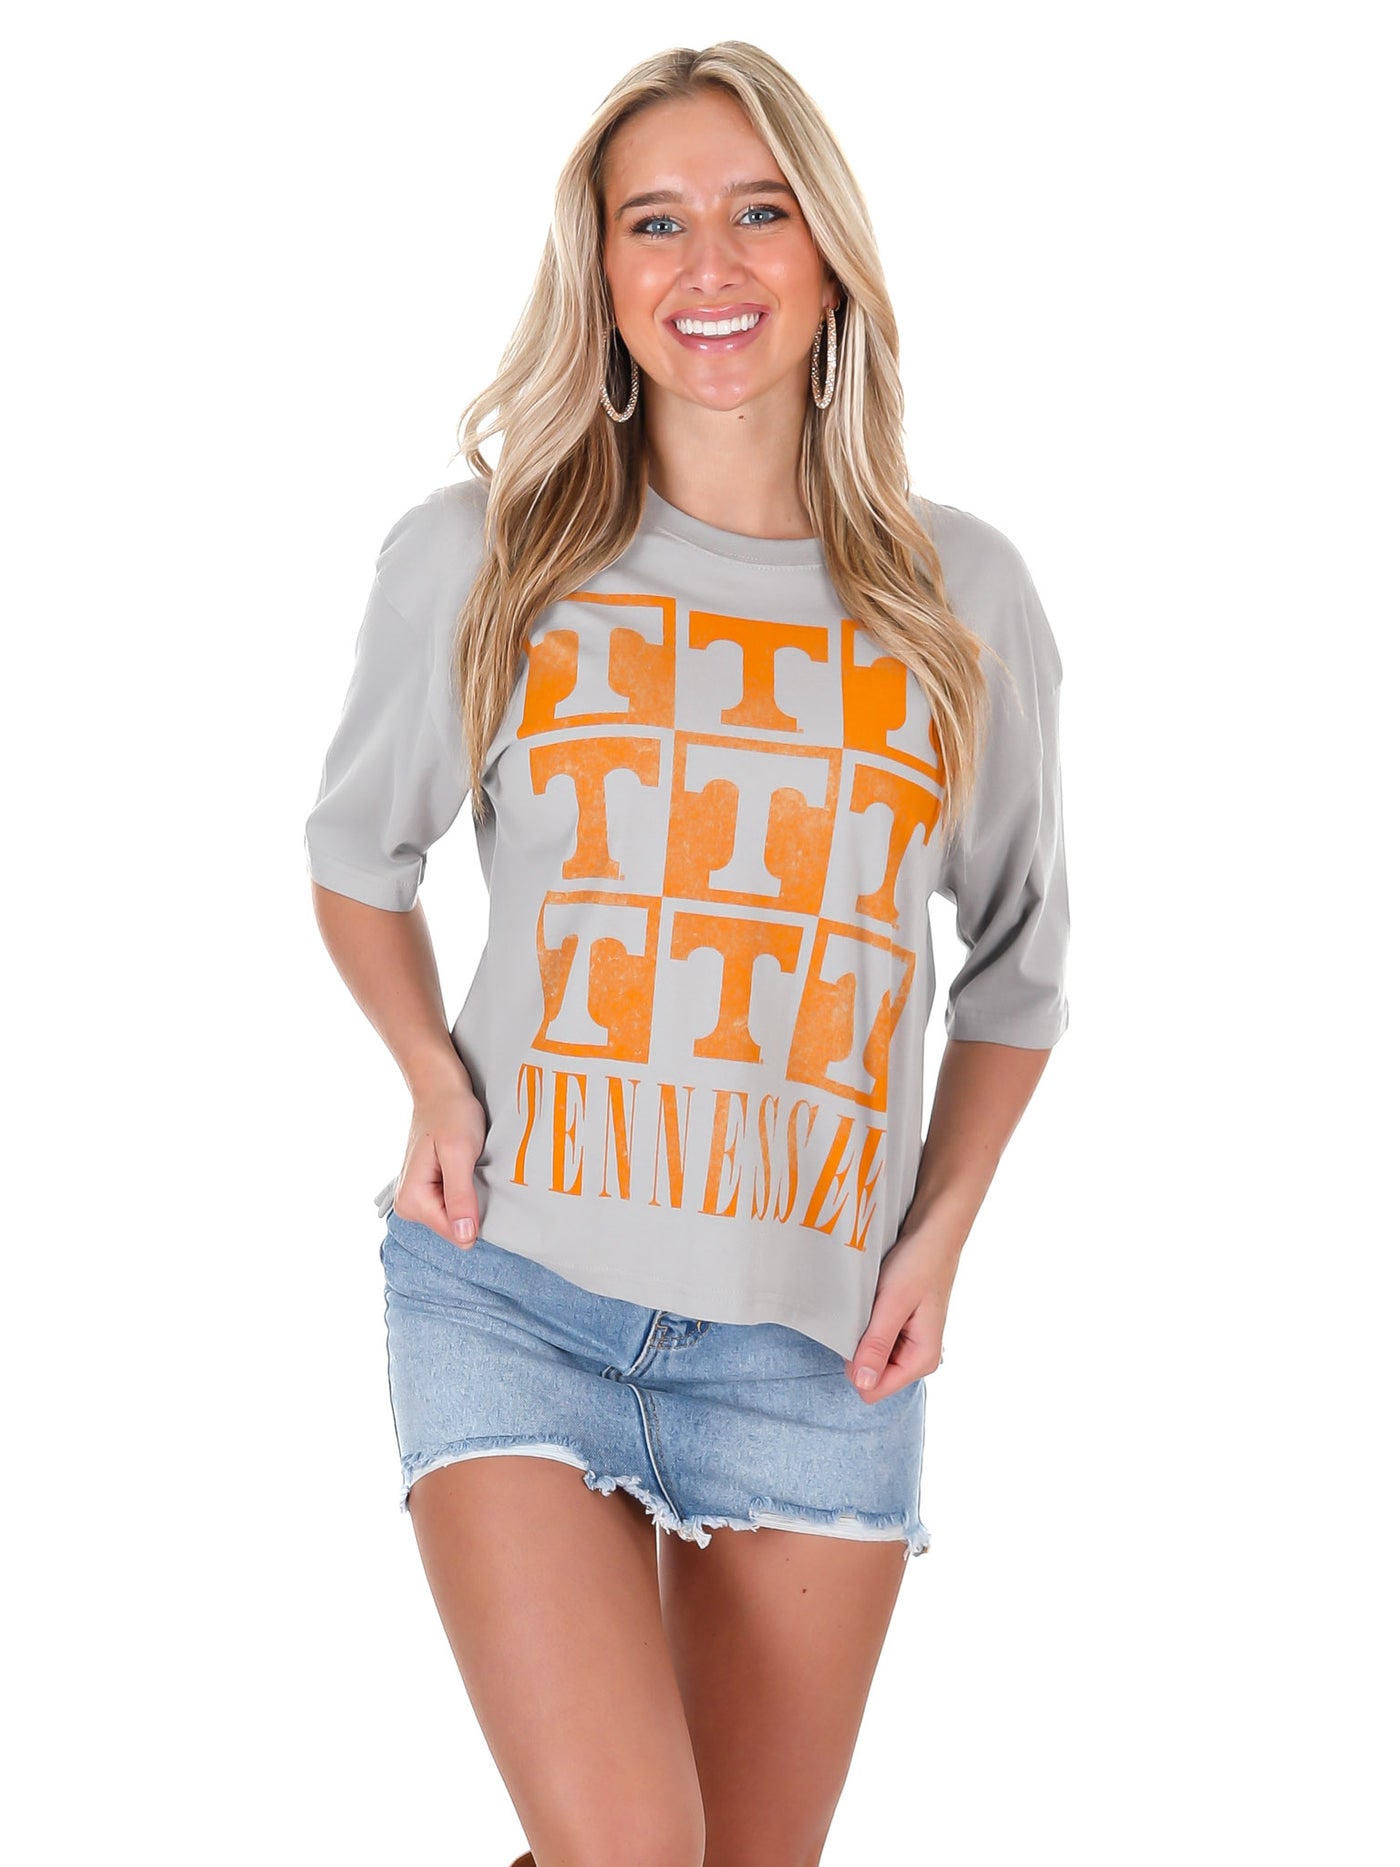 Tennessee Andy Waist Length Top